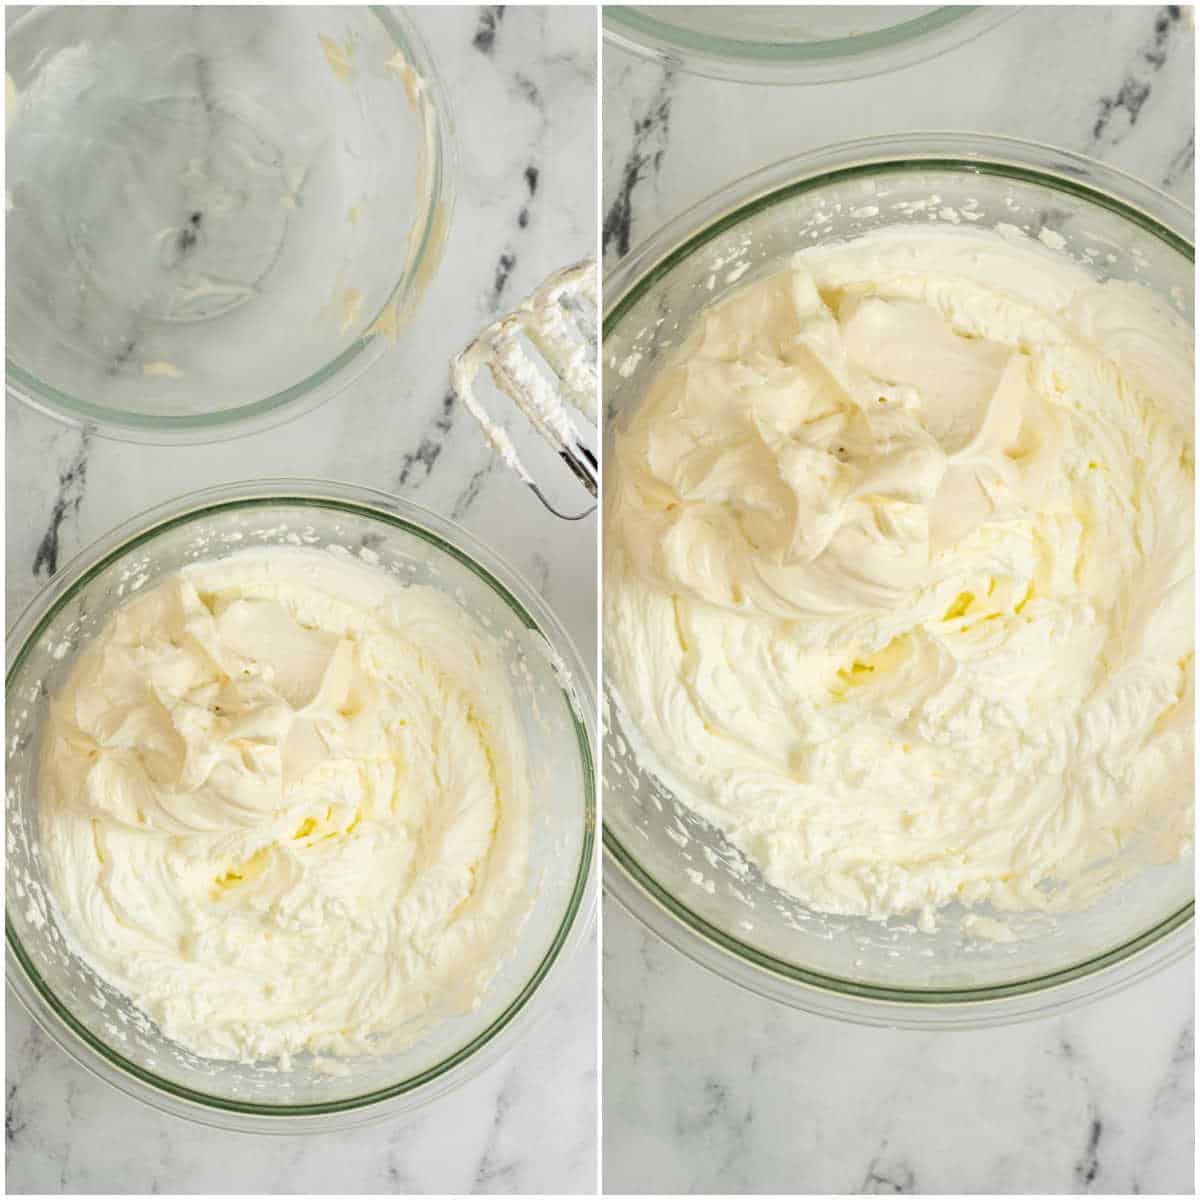 Steps to make stabilized whipped cream.